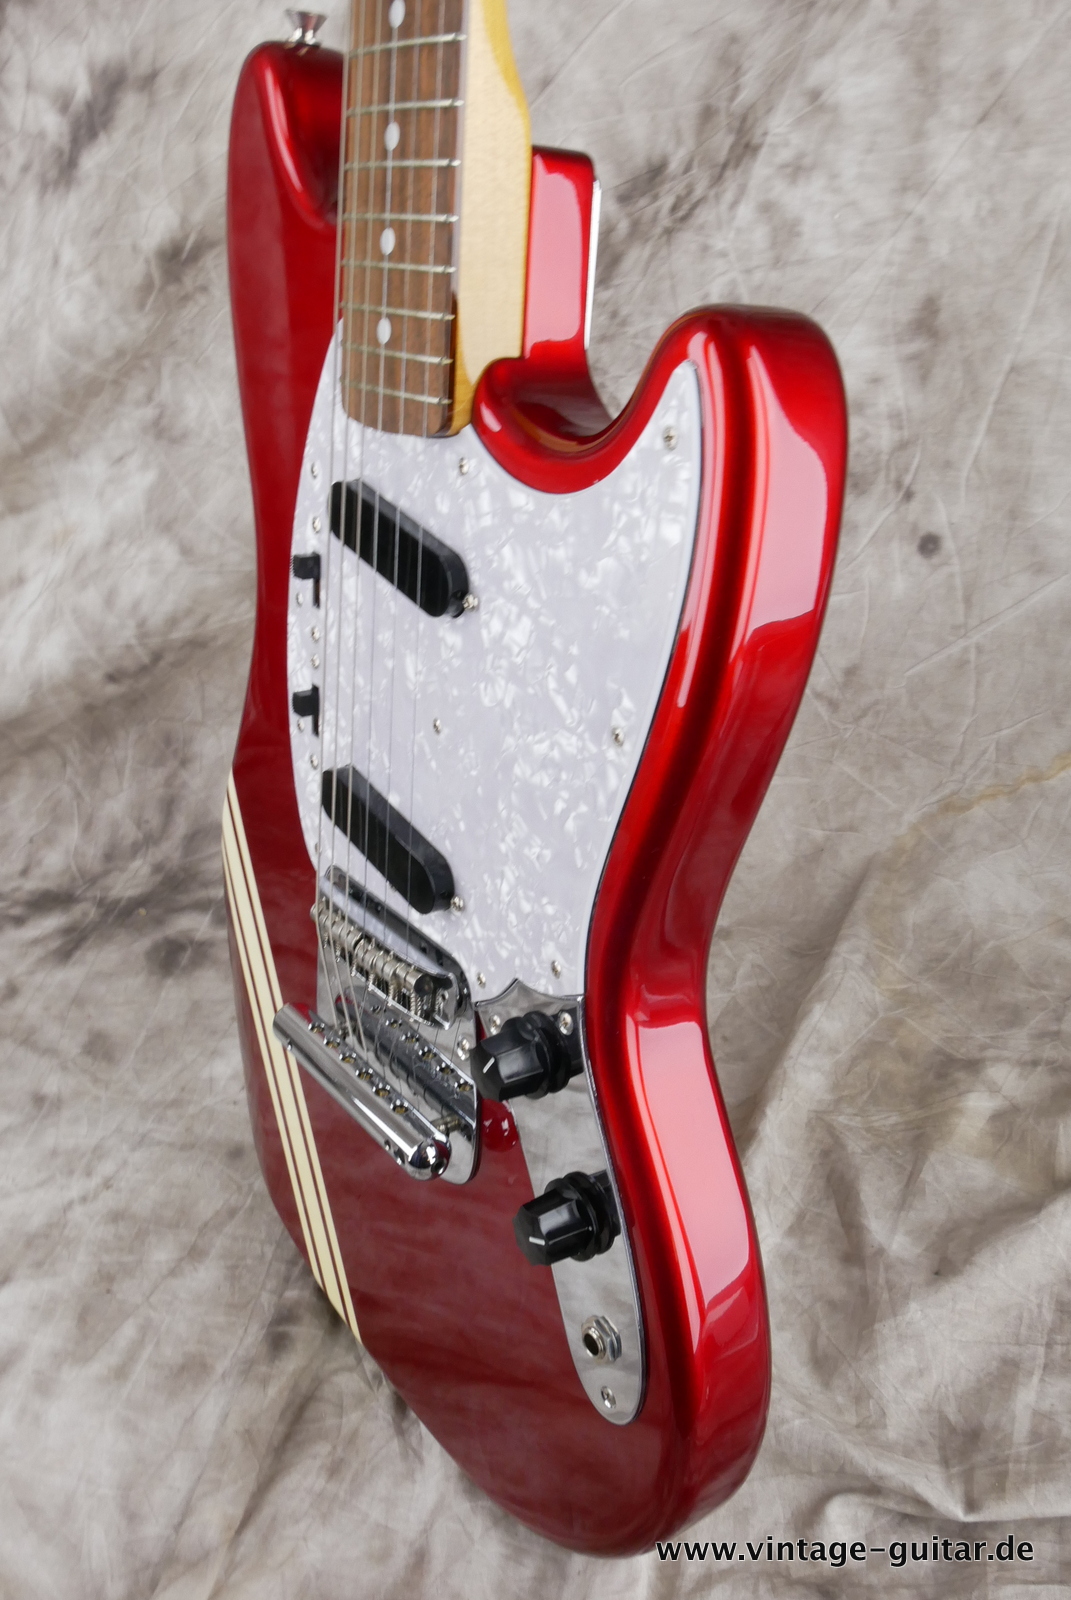 img/vintage/5133/Fender_Mustang_competition_70s_RI_candy_apple_red_Japan_2002-006.JPG